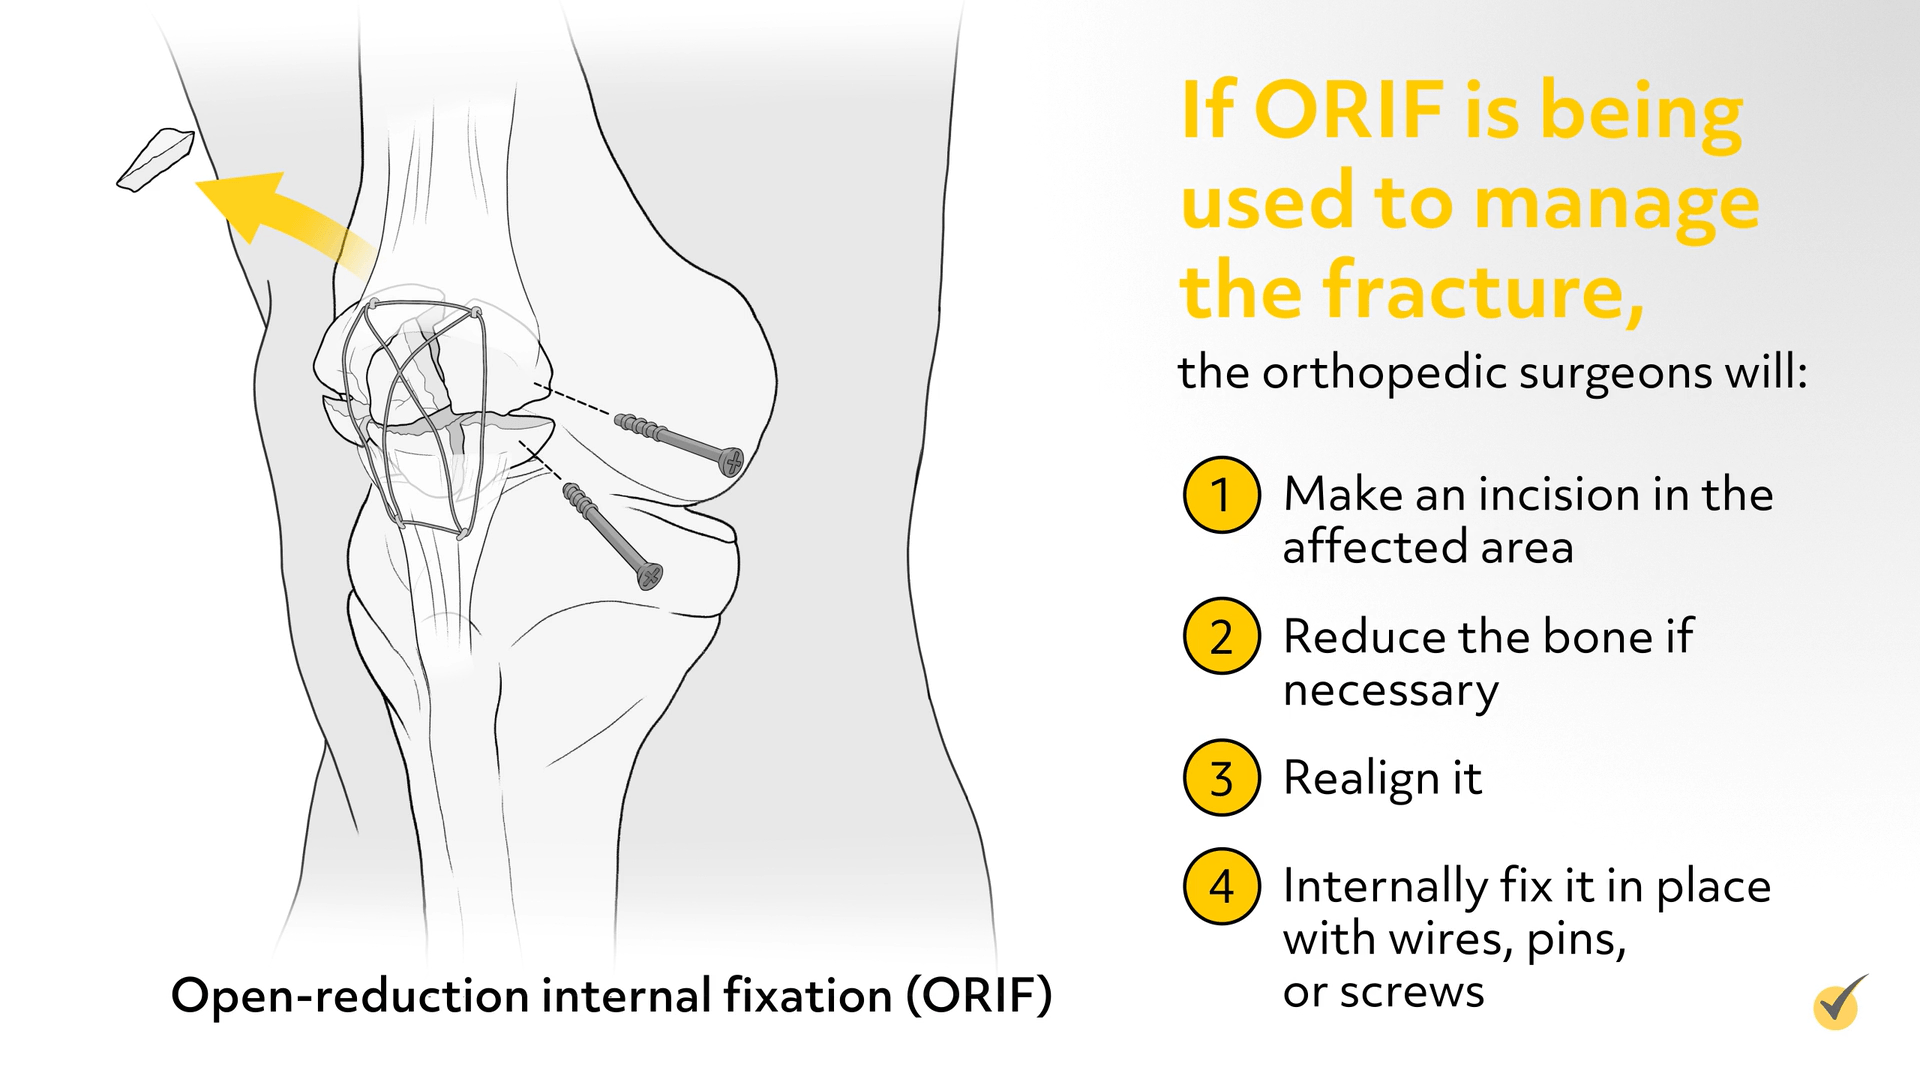 Example of what an Open-reduction internal fixation would look like. Screws, wires, and bands hold the kneecap together.